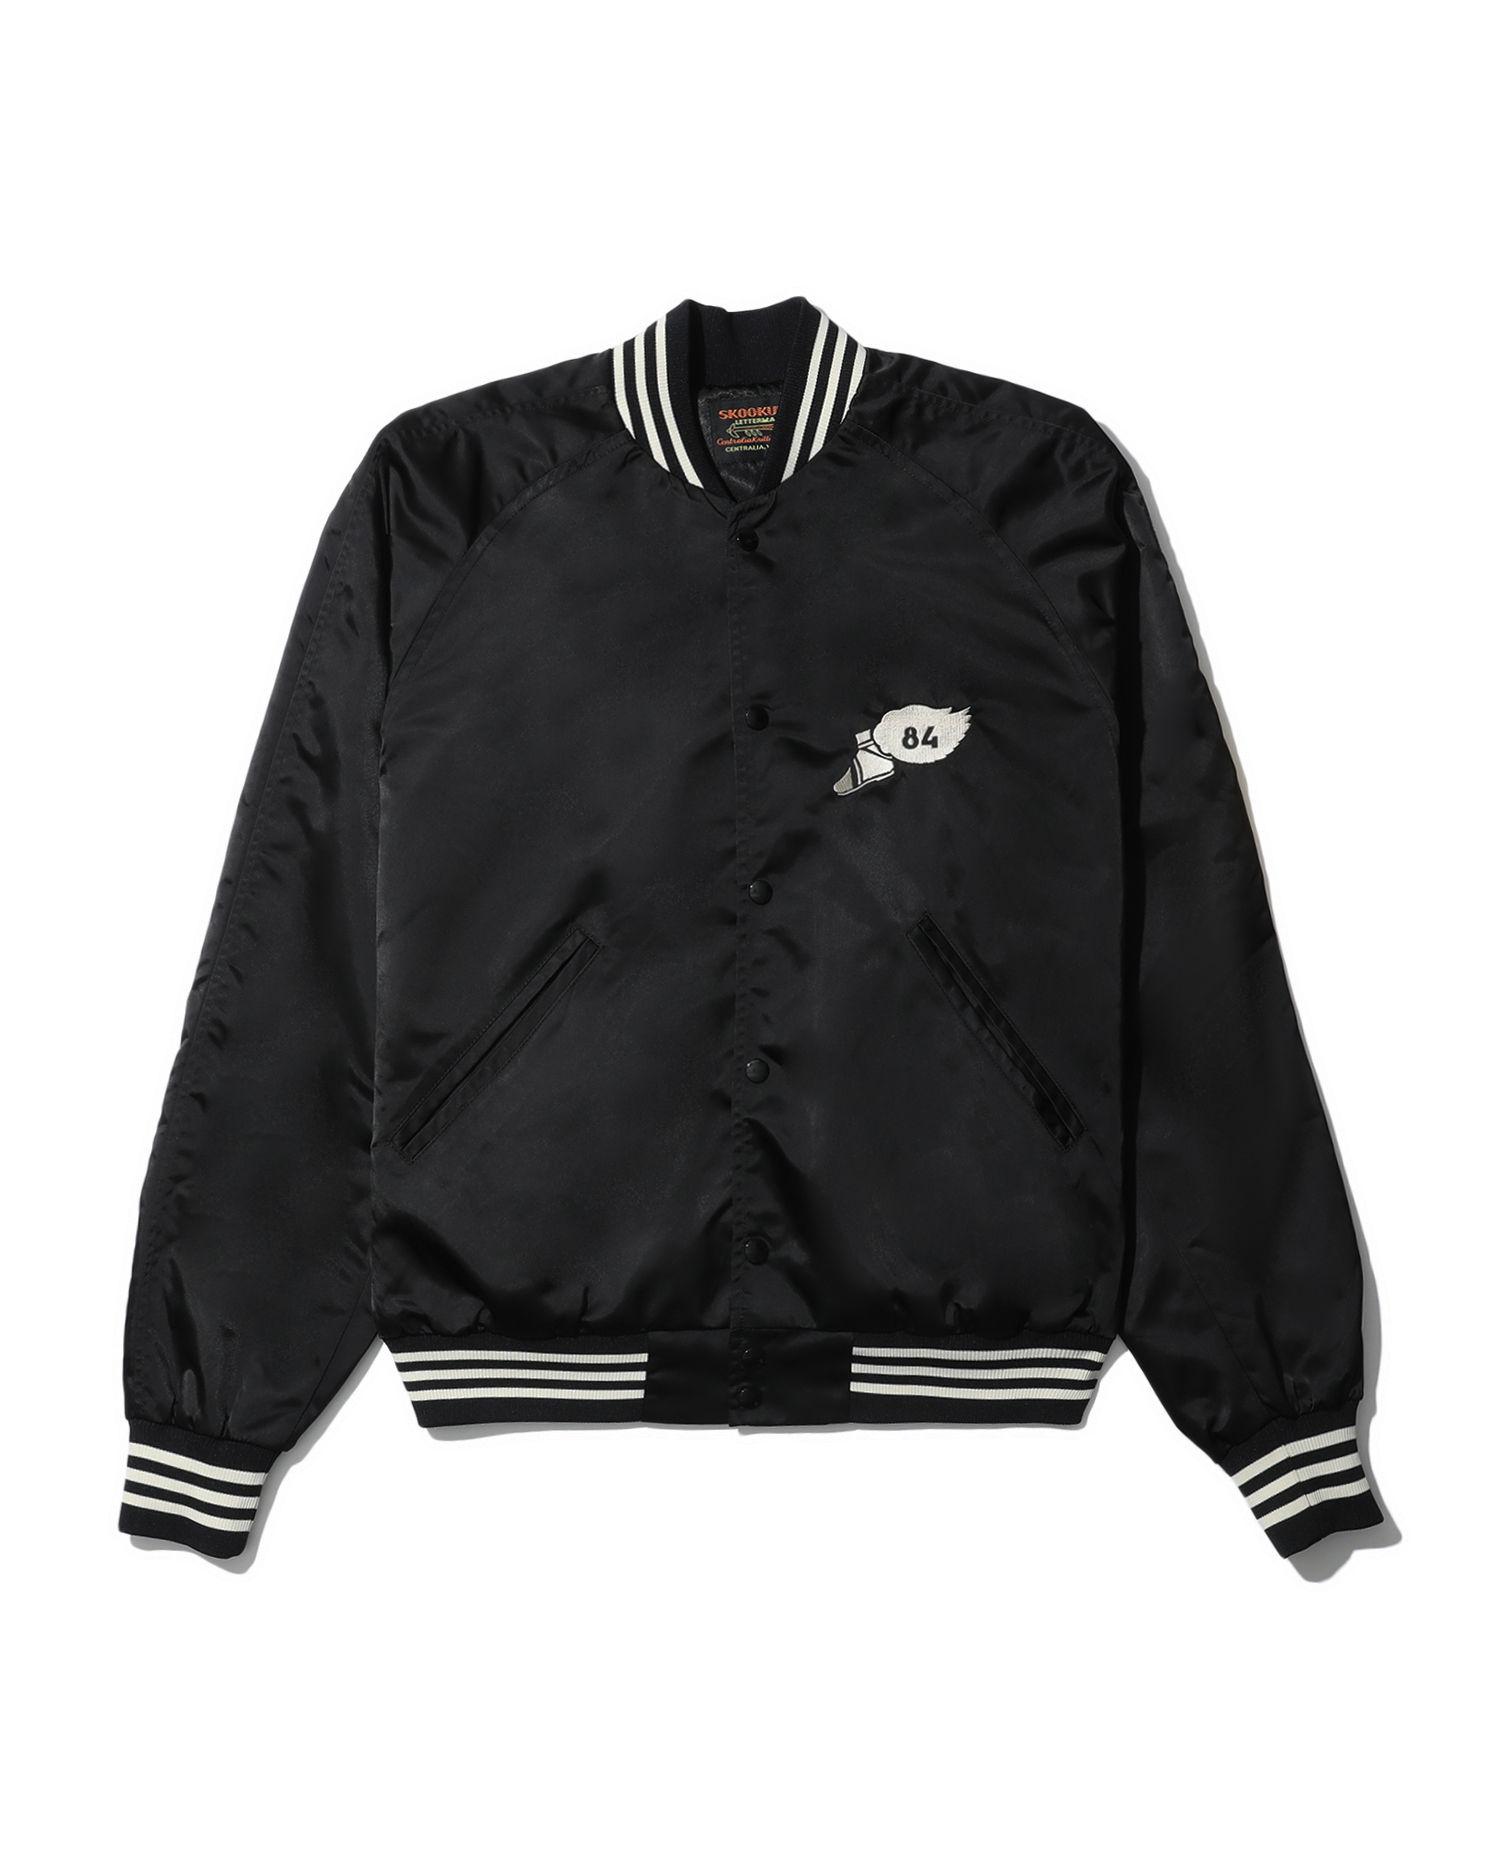 Embroidered baseball jacket by BEAUTY&YOUTH MONKEY TIME